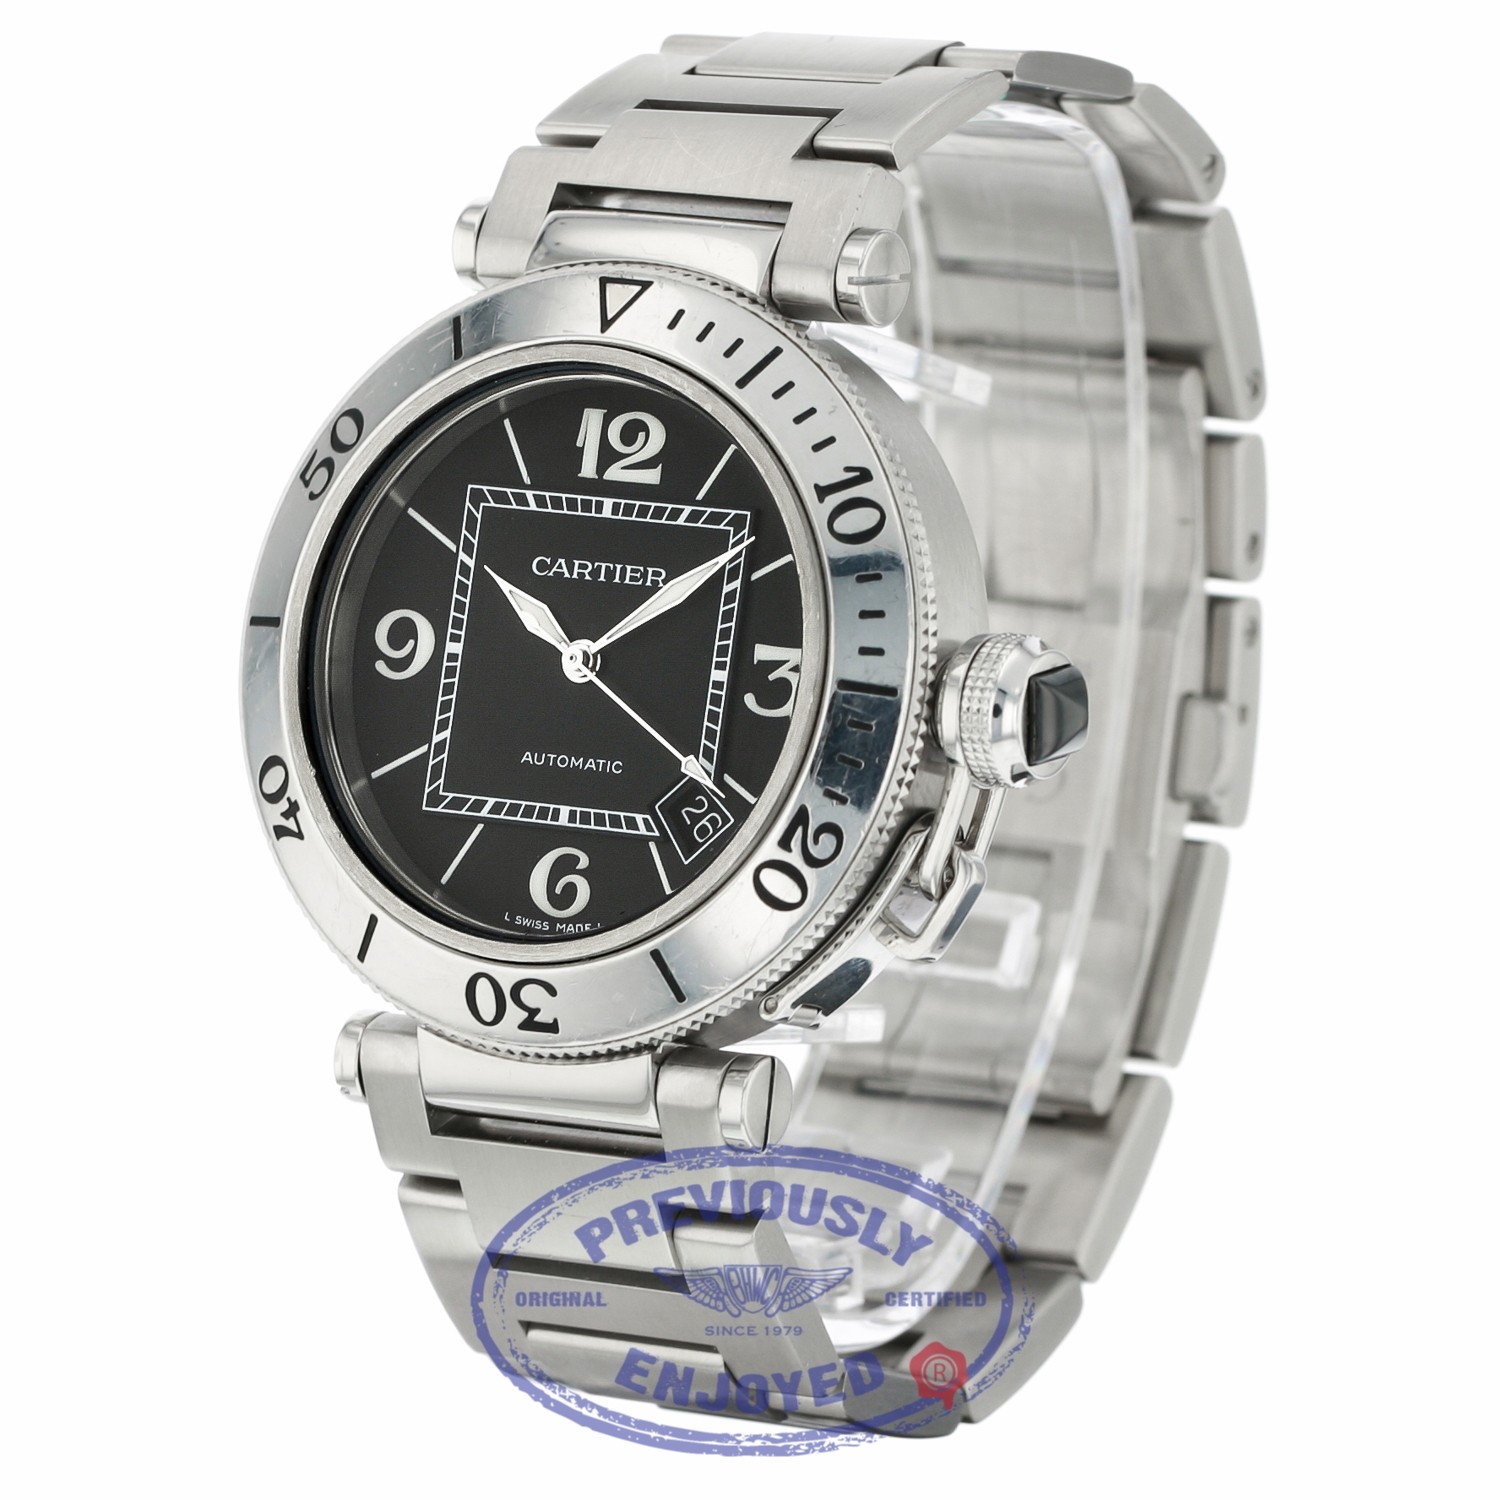 Cartier Pasha Seatimer 40.5mm Automatic Black Dial Stainless Steel 